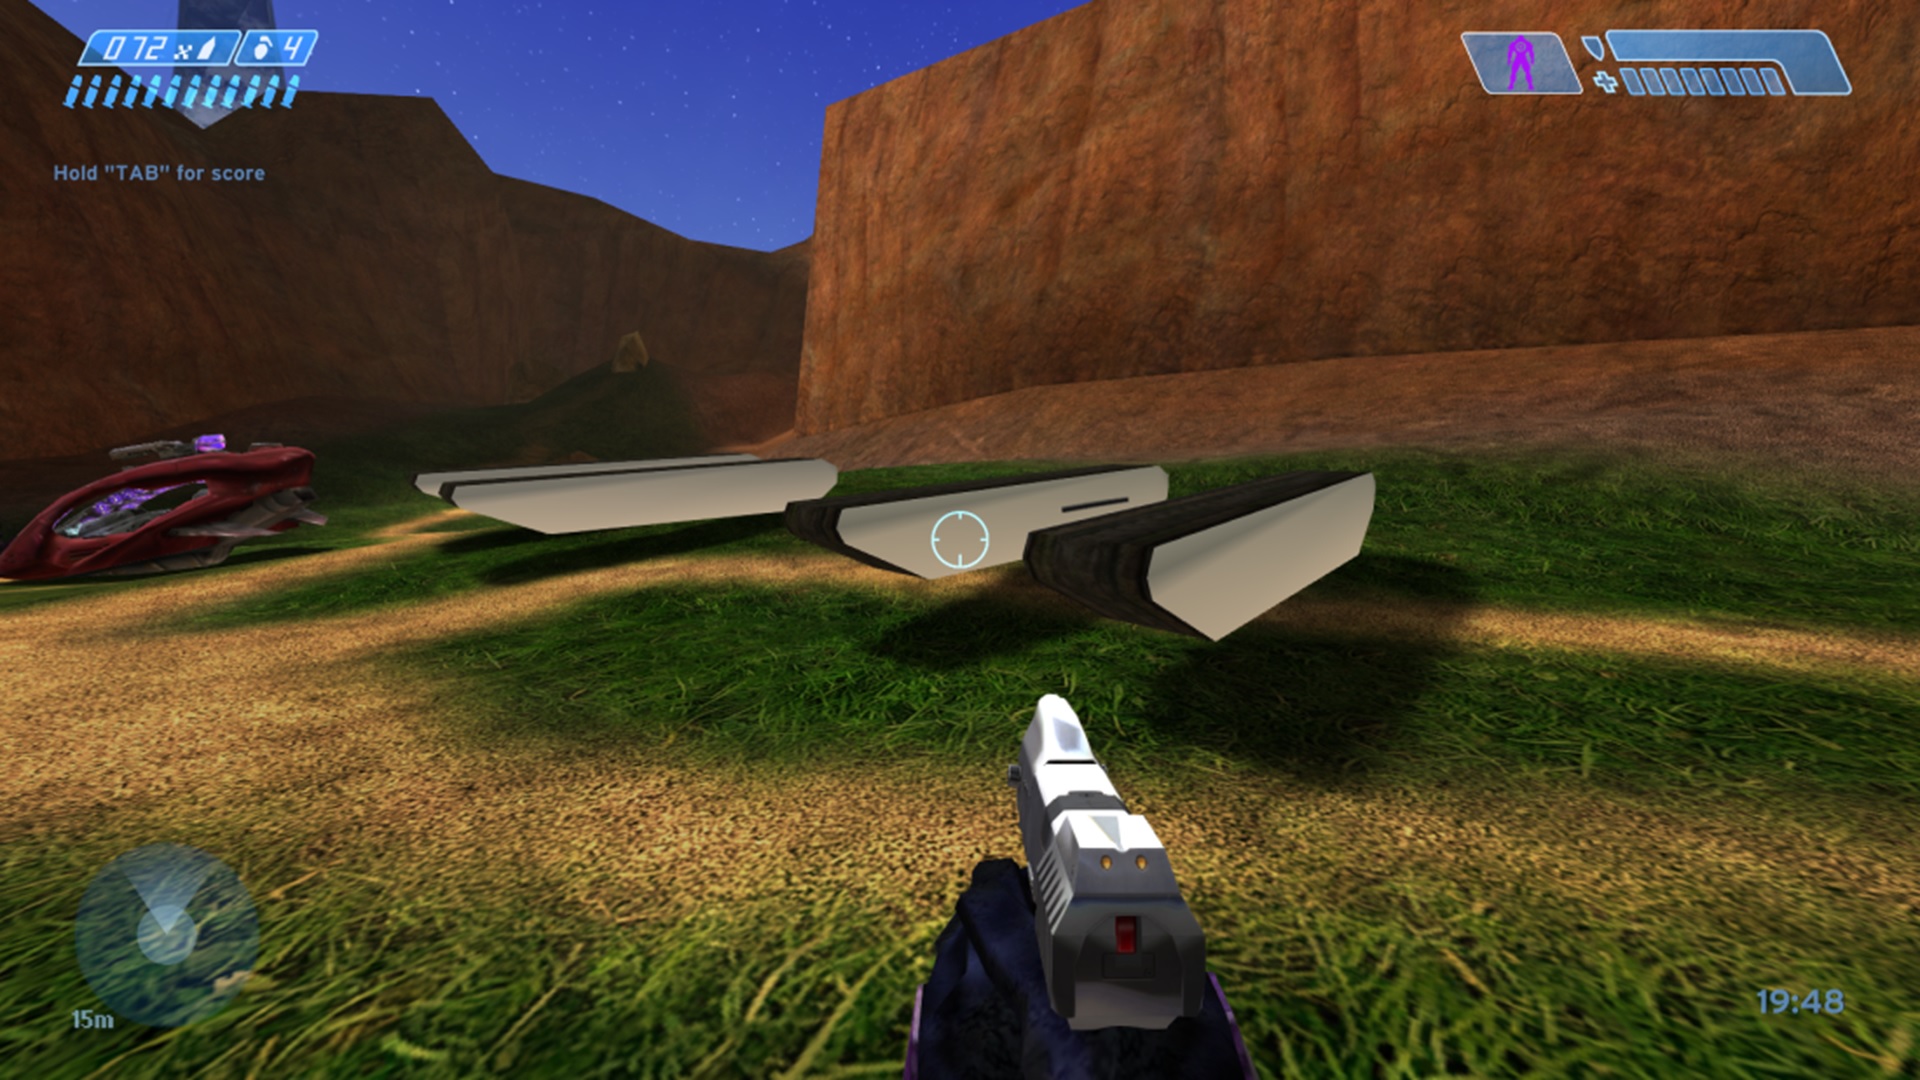 Halo CE shot of stealth tank which failed to import